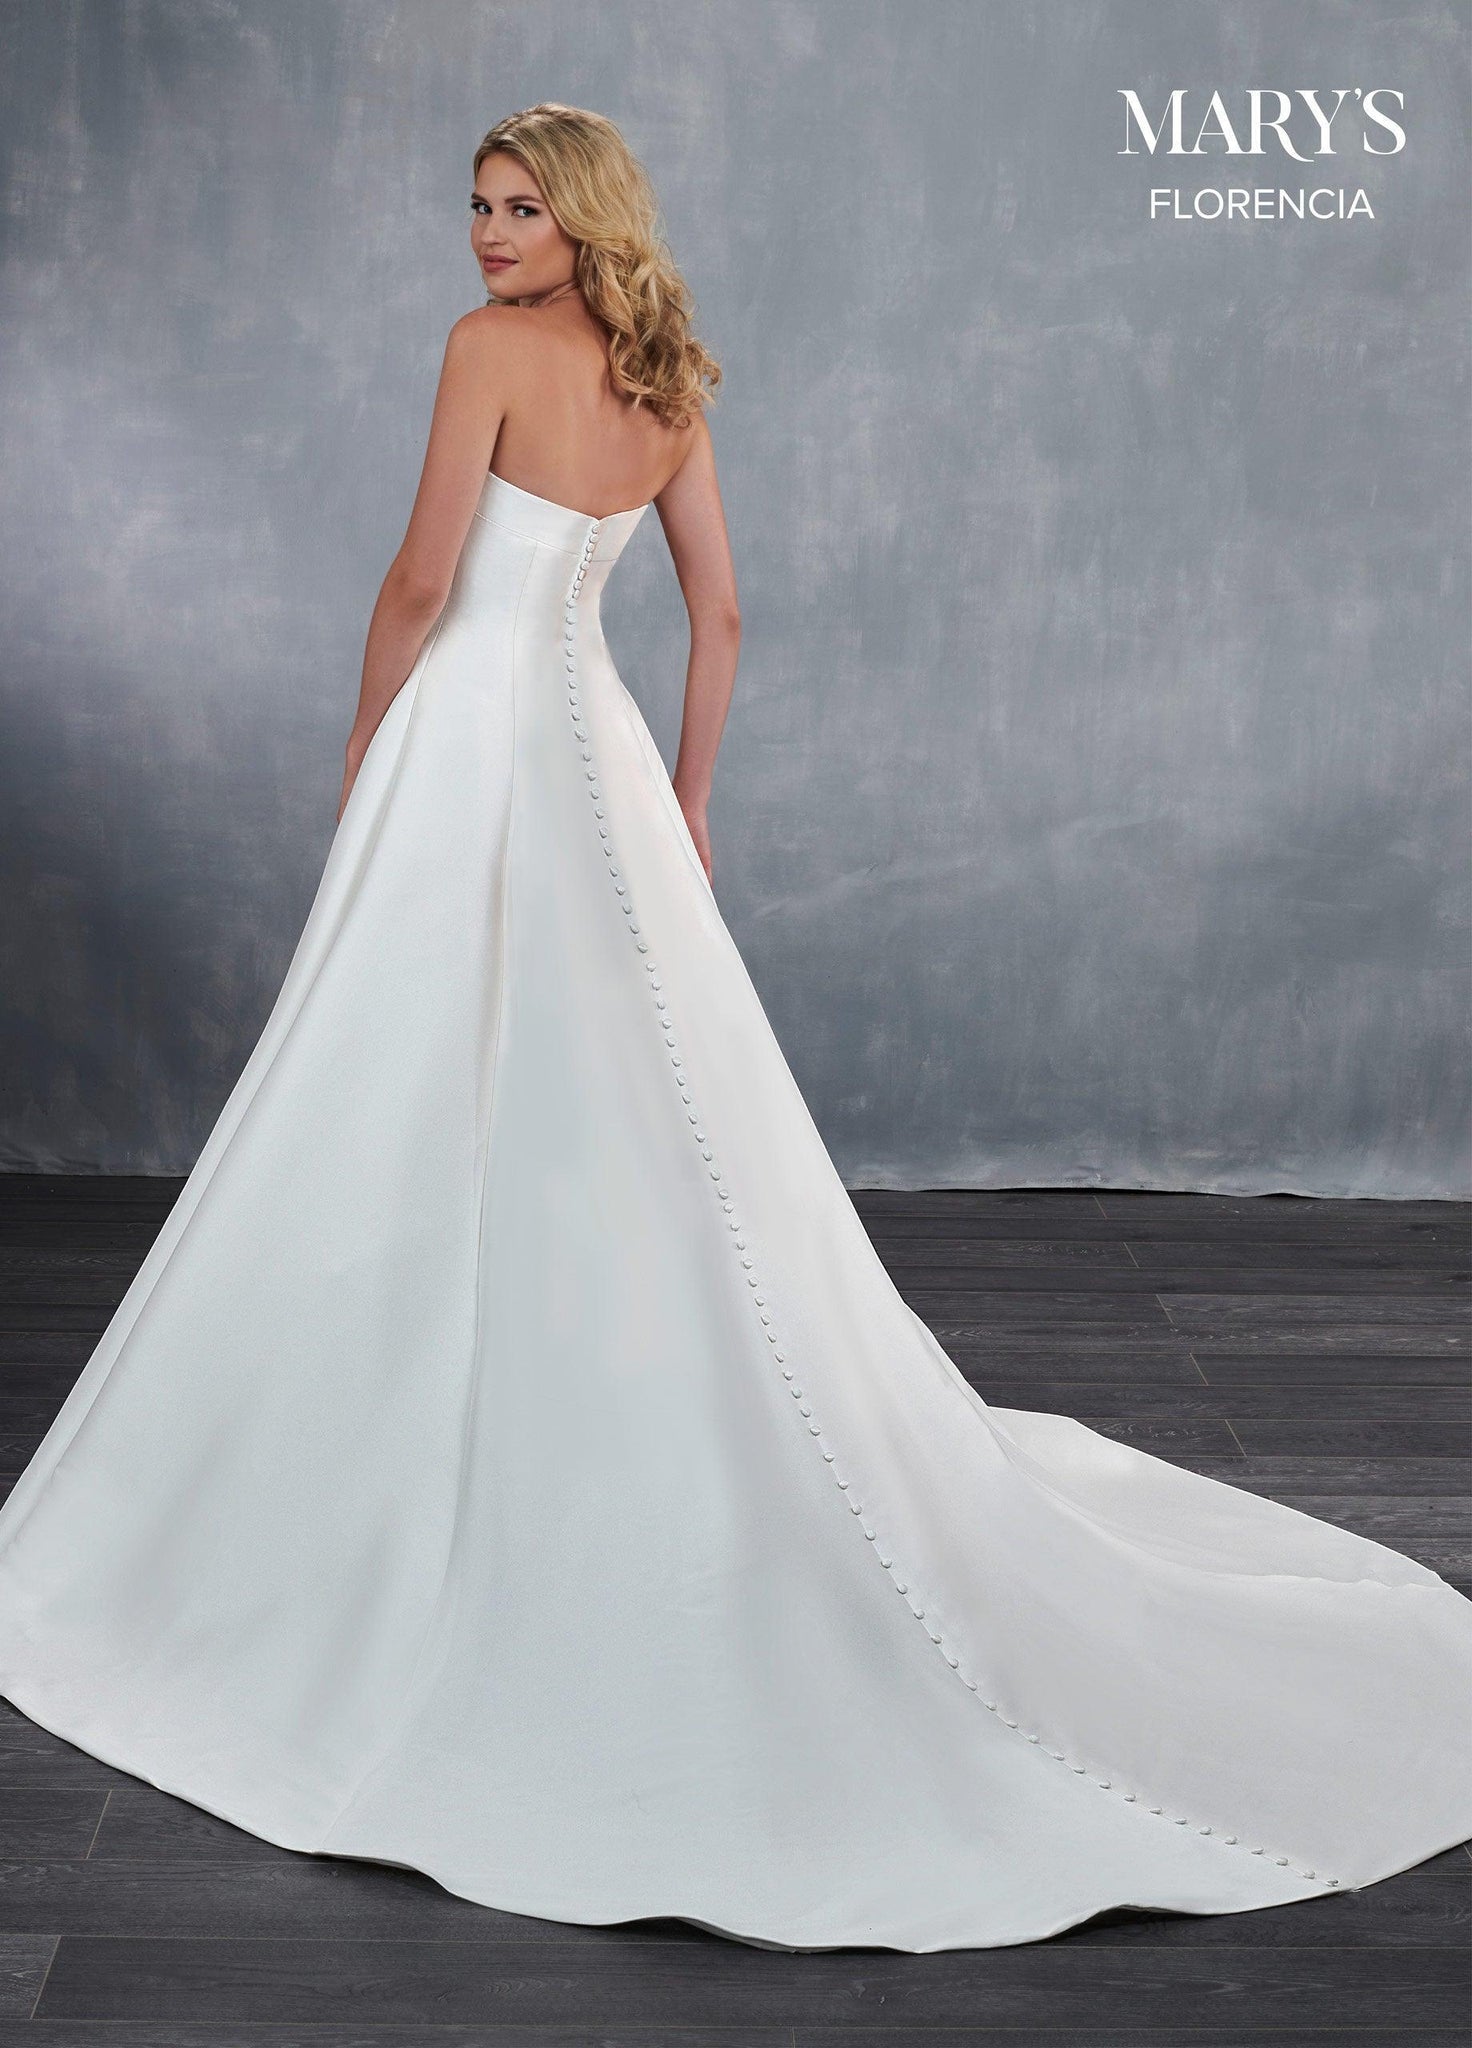 MARY'S BRIDAL - Constance - Adore Bridal and Occasion Wear